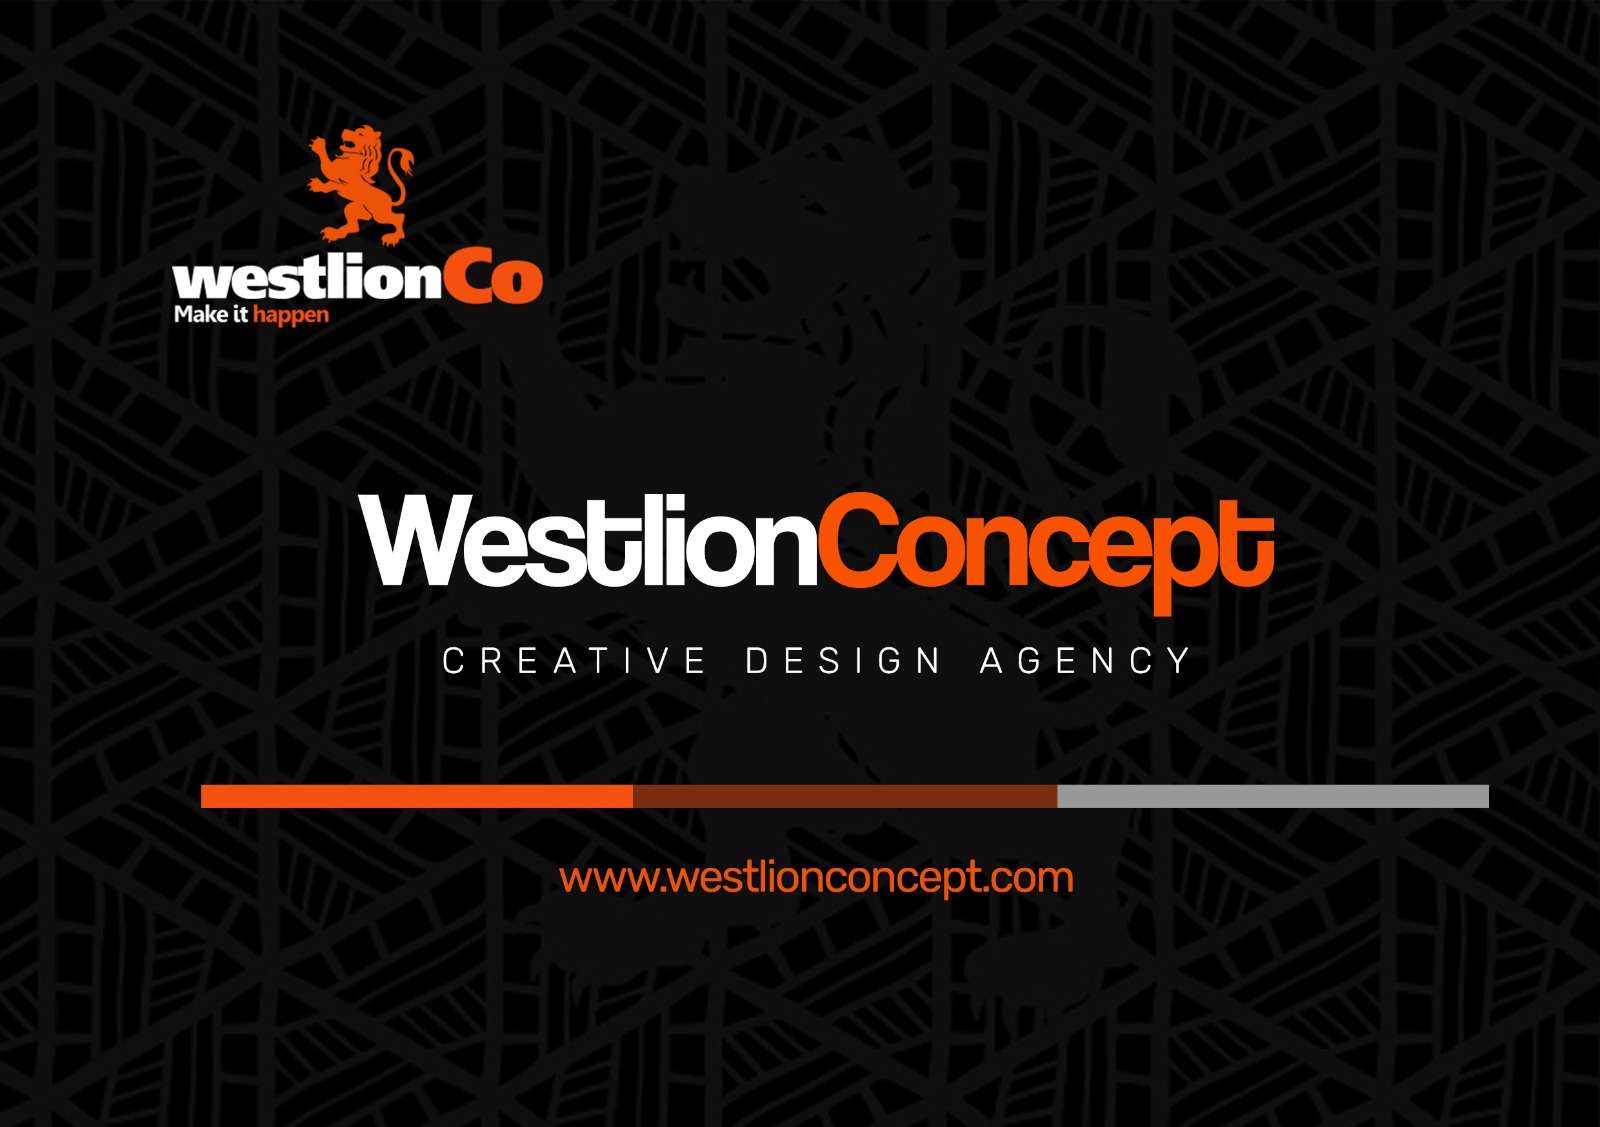 WestlionCo launches Westlion Concept, a bespoke business advisory to support entrepreneurs.